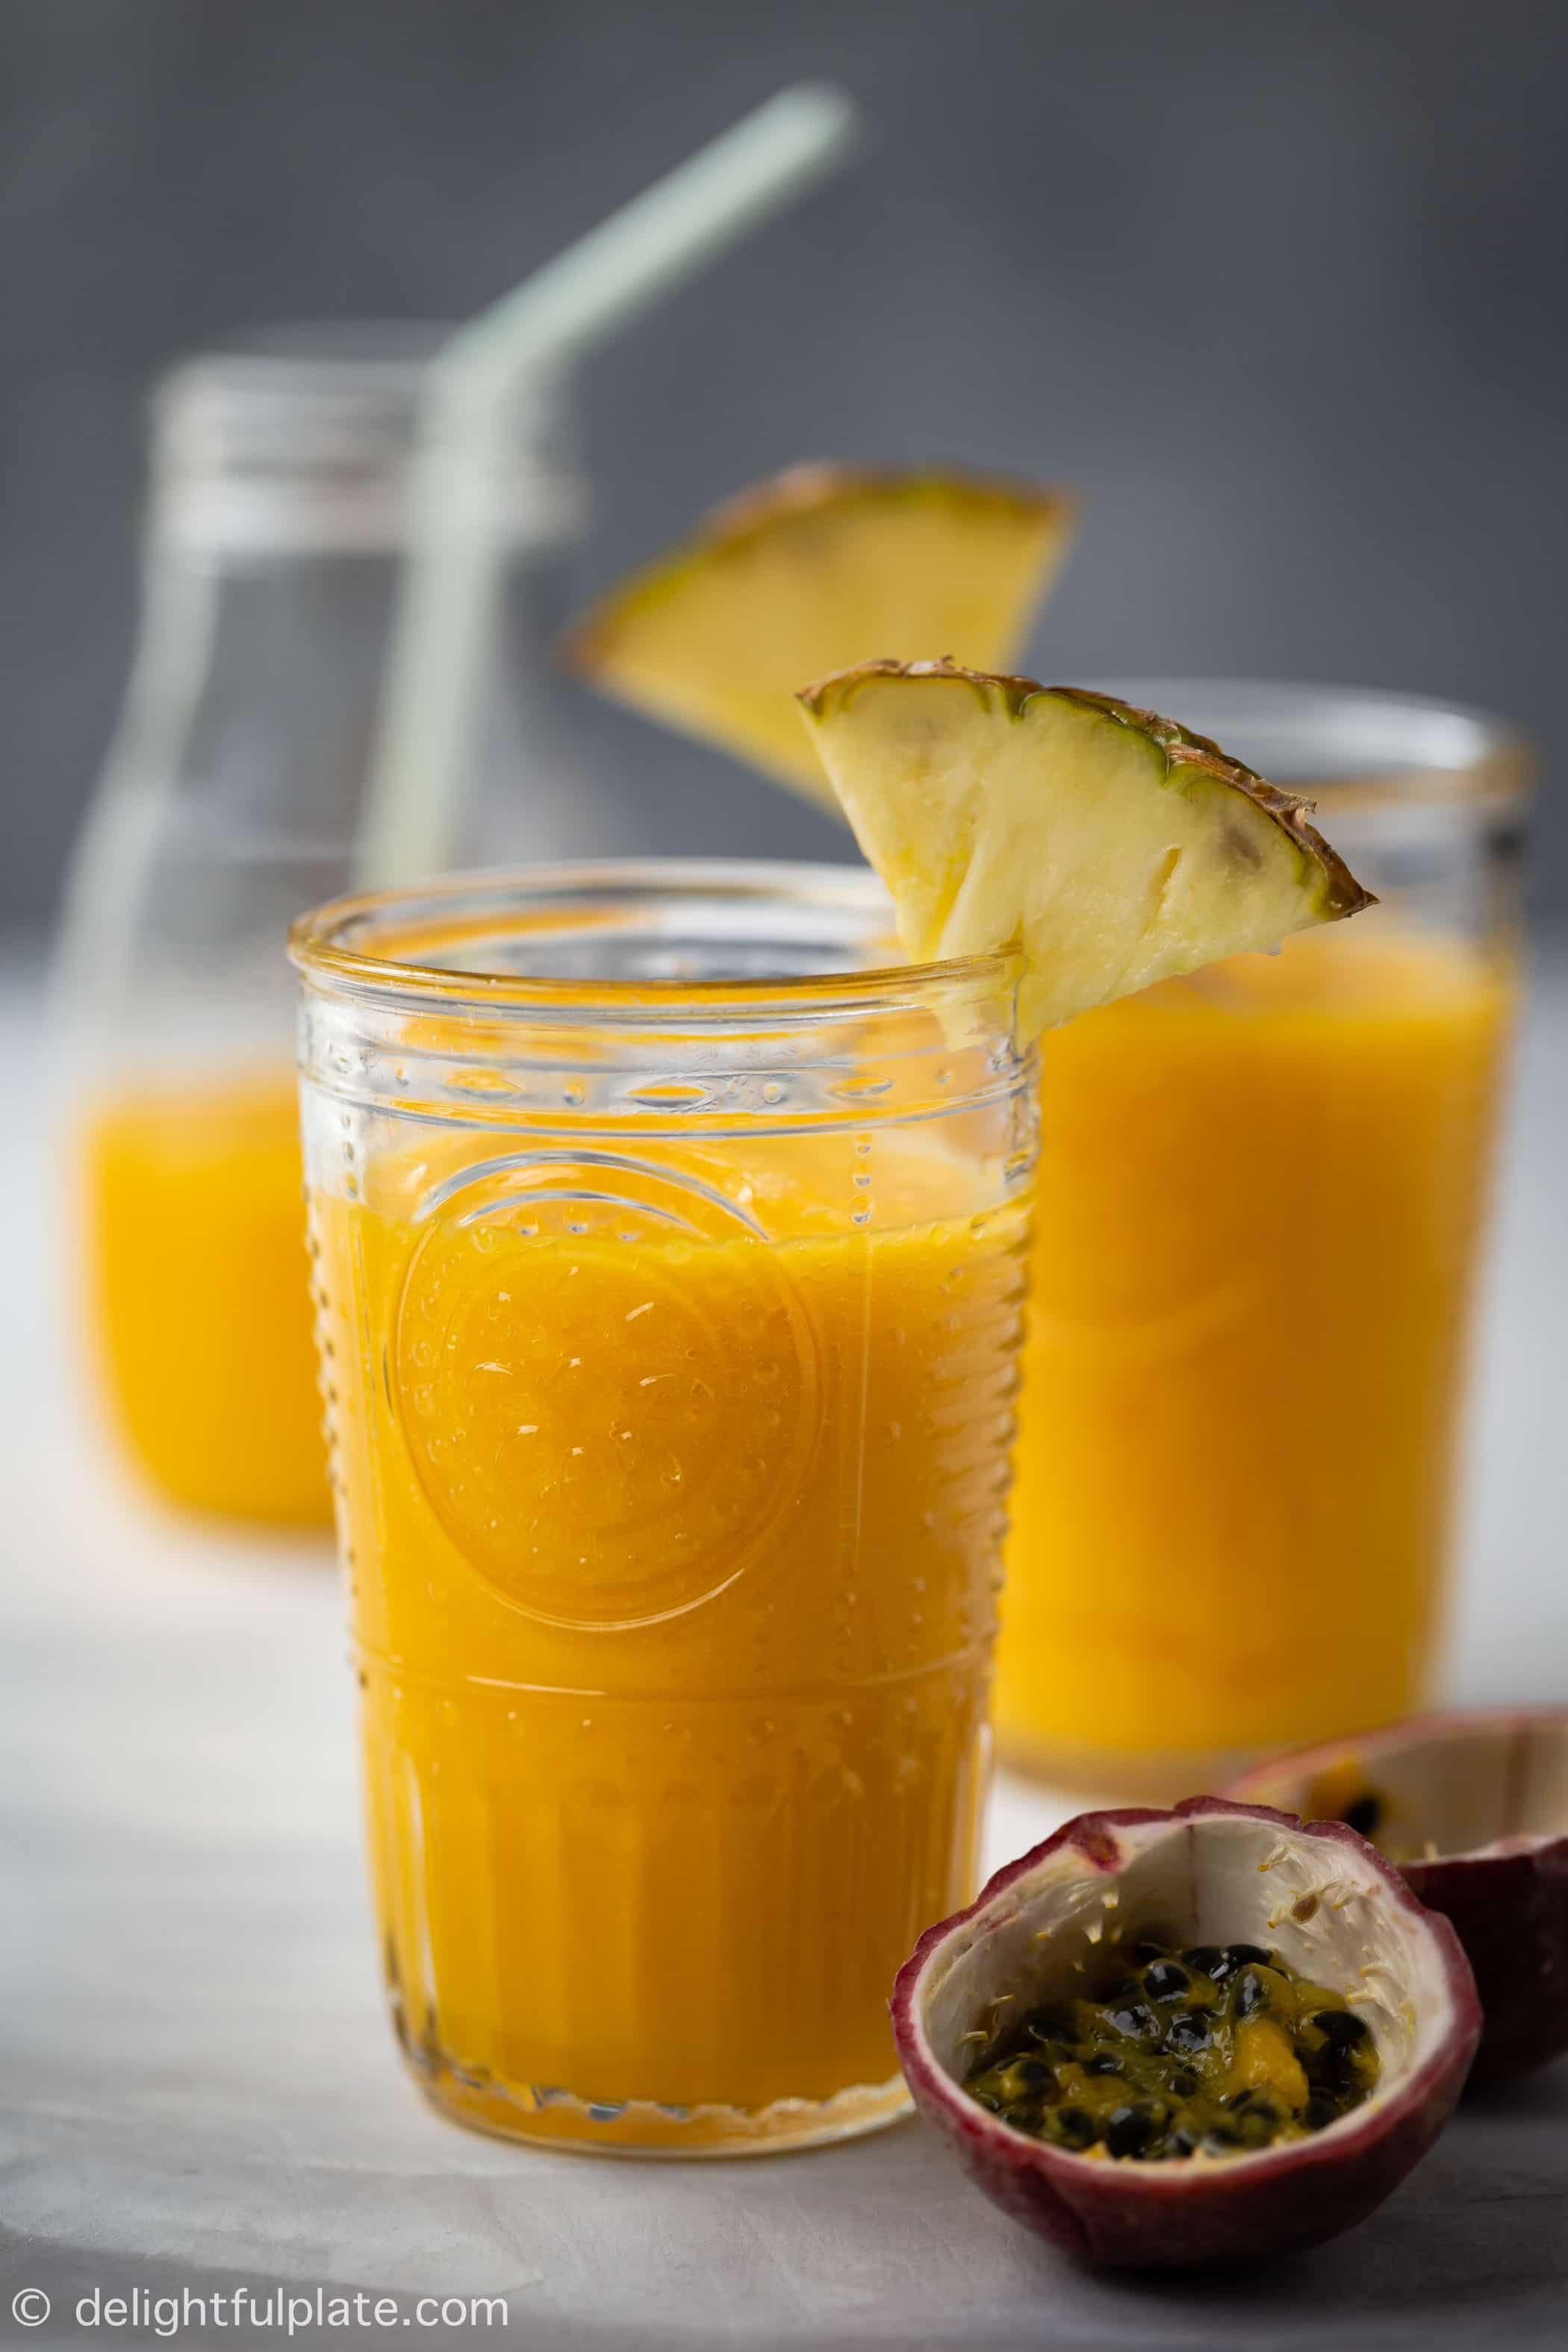 This Tropical Pineapple Mango Smoothie is a tasty and healthy drink with a pleasant sweet fruity scent. This thirst-quenching drink is also dairy-free with no added sugar.